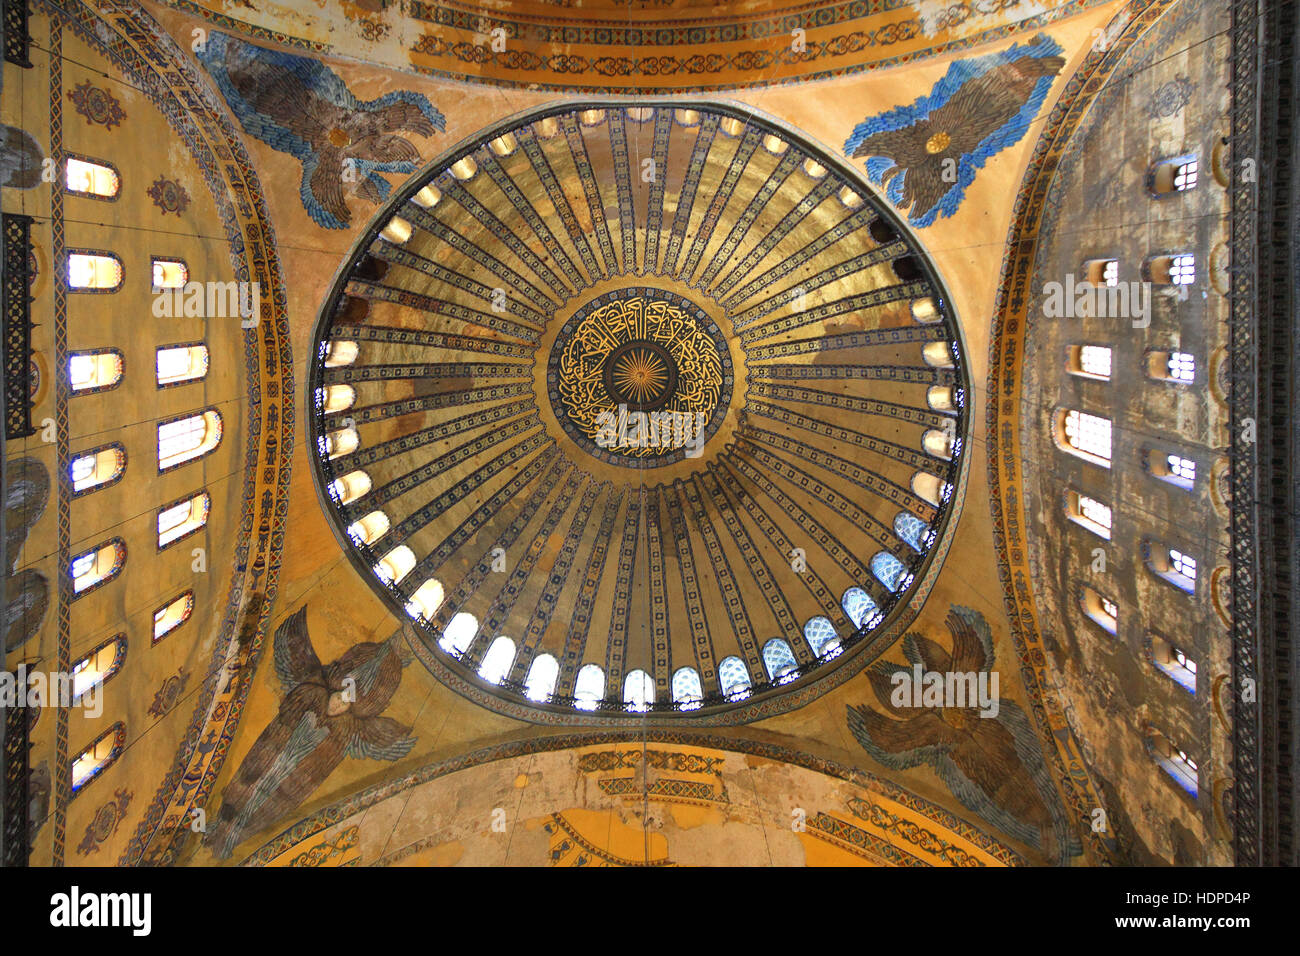 View over the dome of Hagia Sophia from inside, in Istanbul, Turkey. Stock Photo